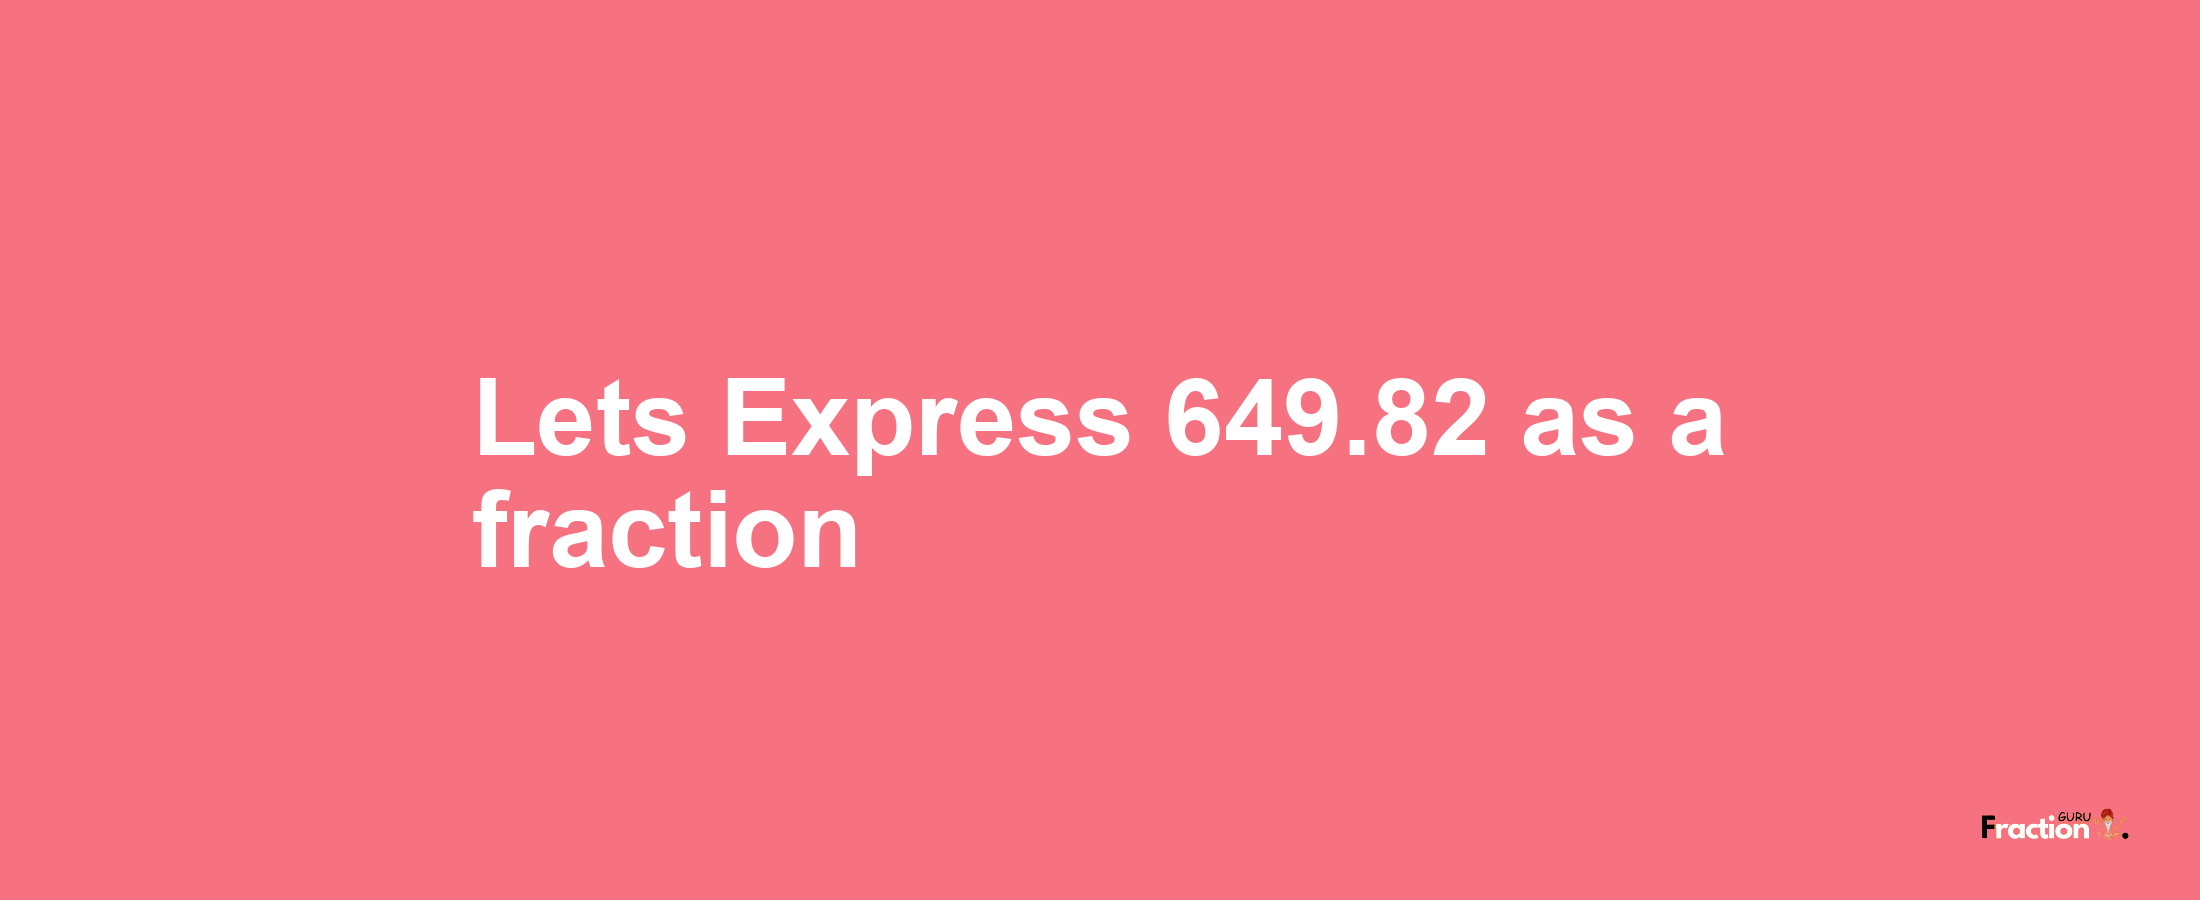 Lets Express 649.82 as afraction